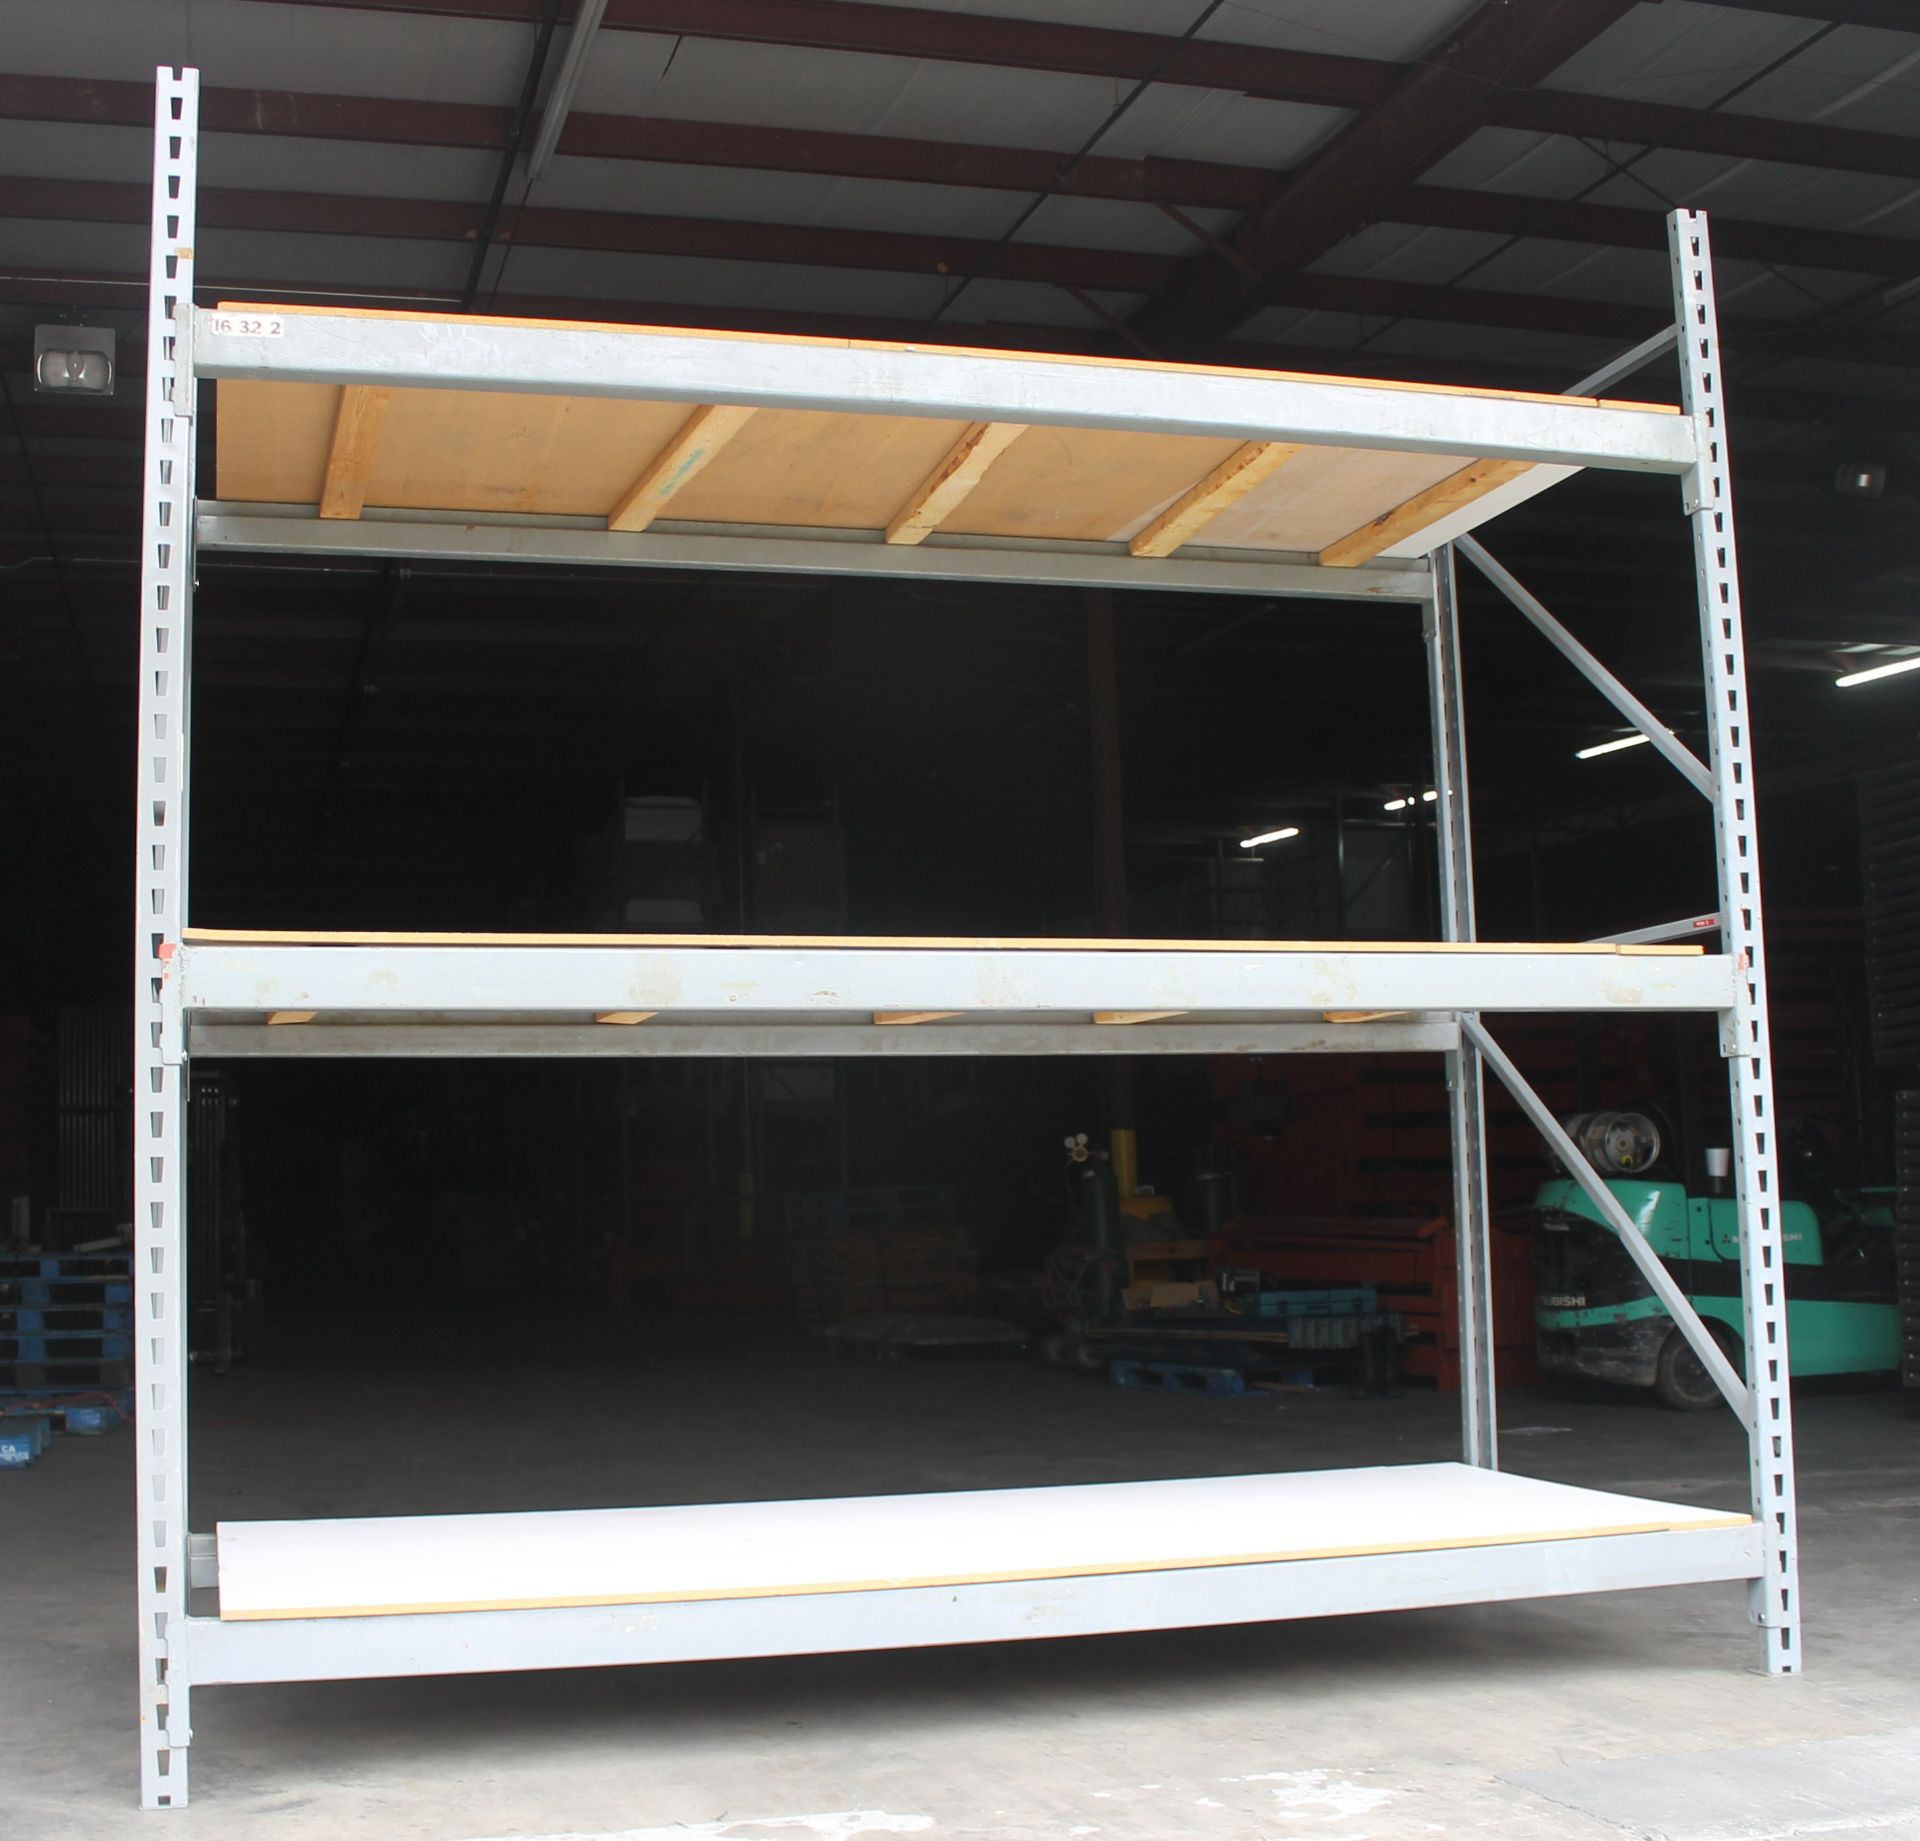 14 BAYS OF 120"H X 48"D X 117"L INDUSTRIAL SHELVING WITH LAMINATED WOOD DECKING,